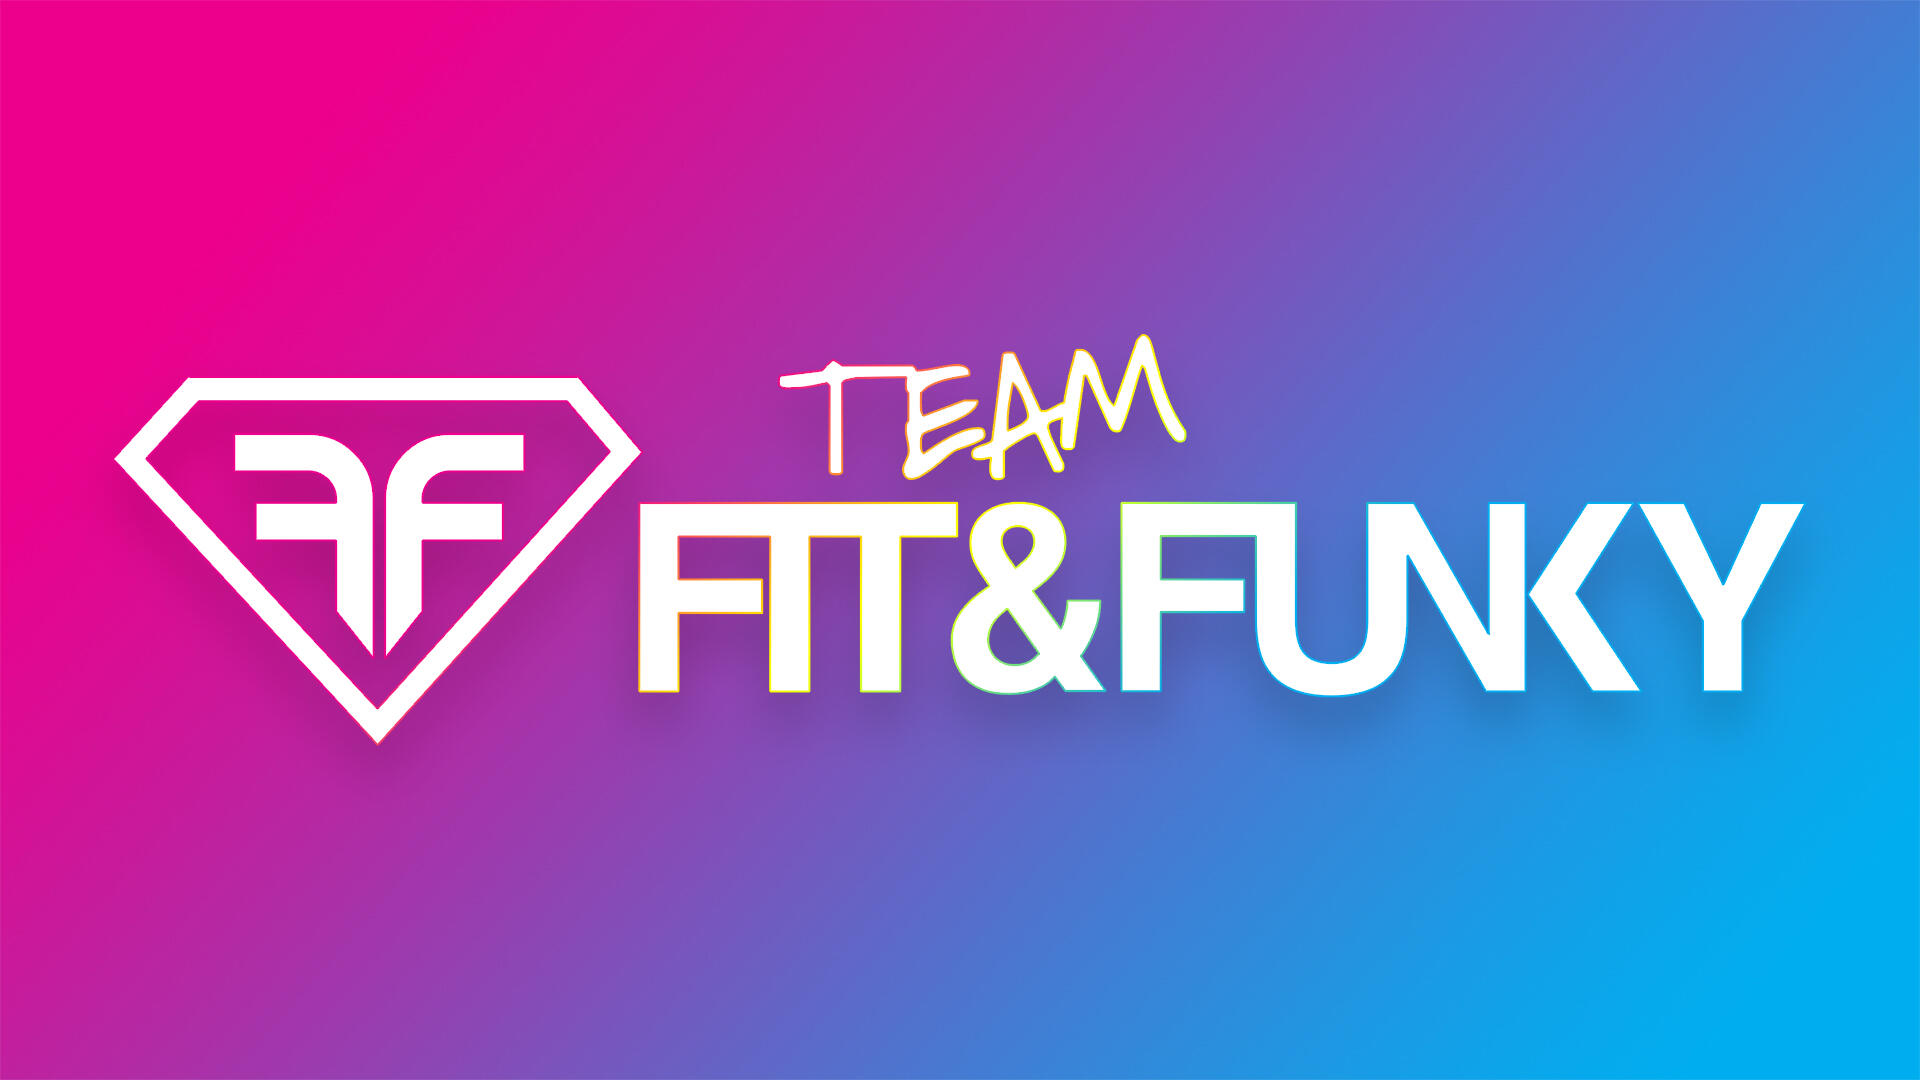 White Team Fit & Funky typeface and logo on a pink and blue gradient background